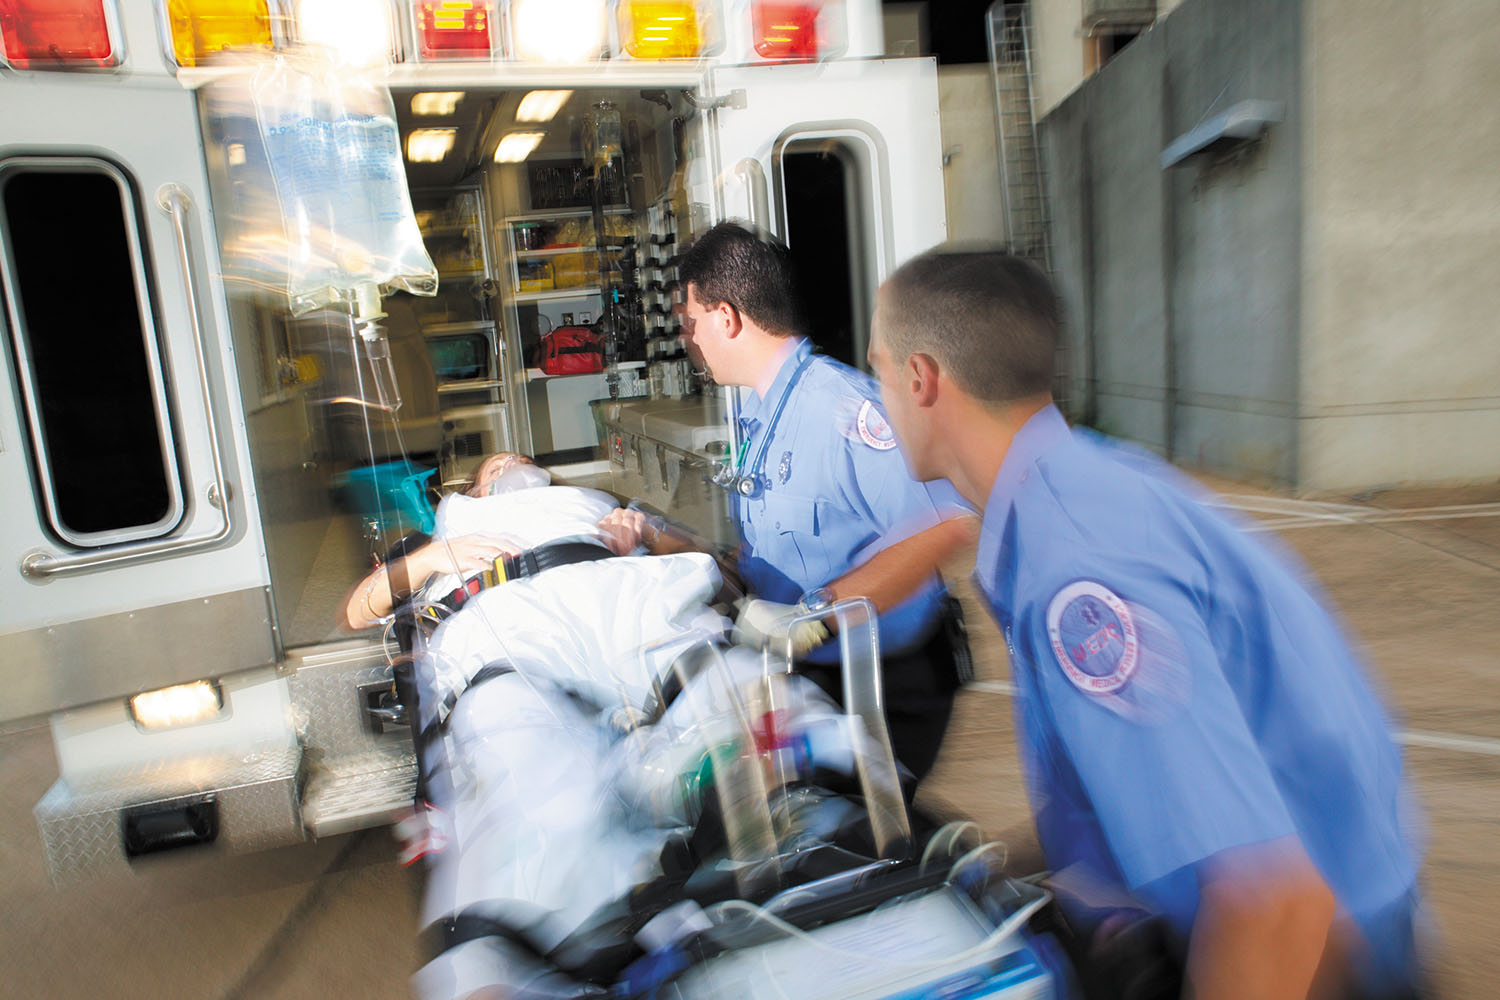 Emergency Medical Services Software Market by leading research firm| Medhost EDIS, emsCharts, ESO, ImageTrend and Forecast 2020 To 2027